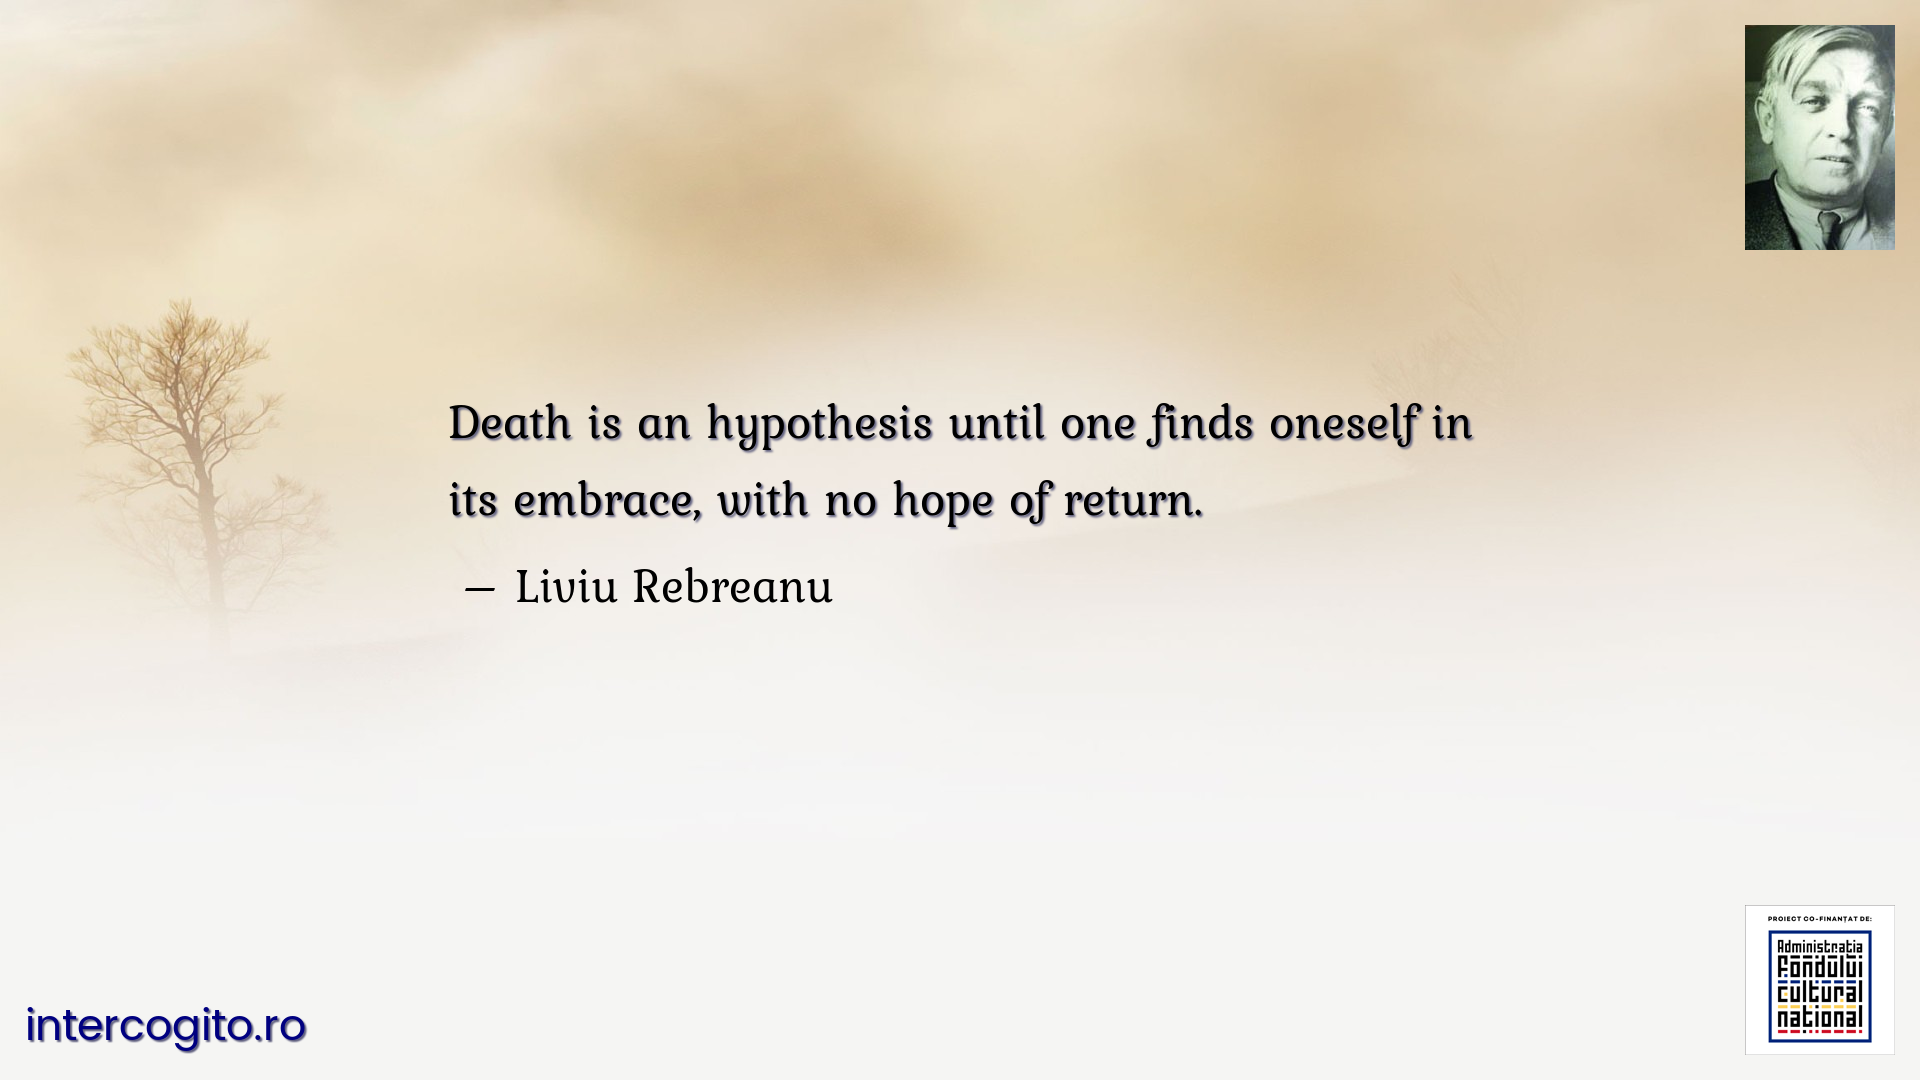 Death is an hypothesis until one finds oneself in its embrace, with no hope of return.